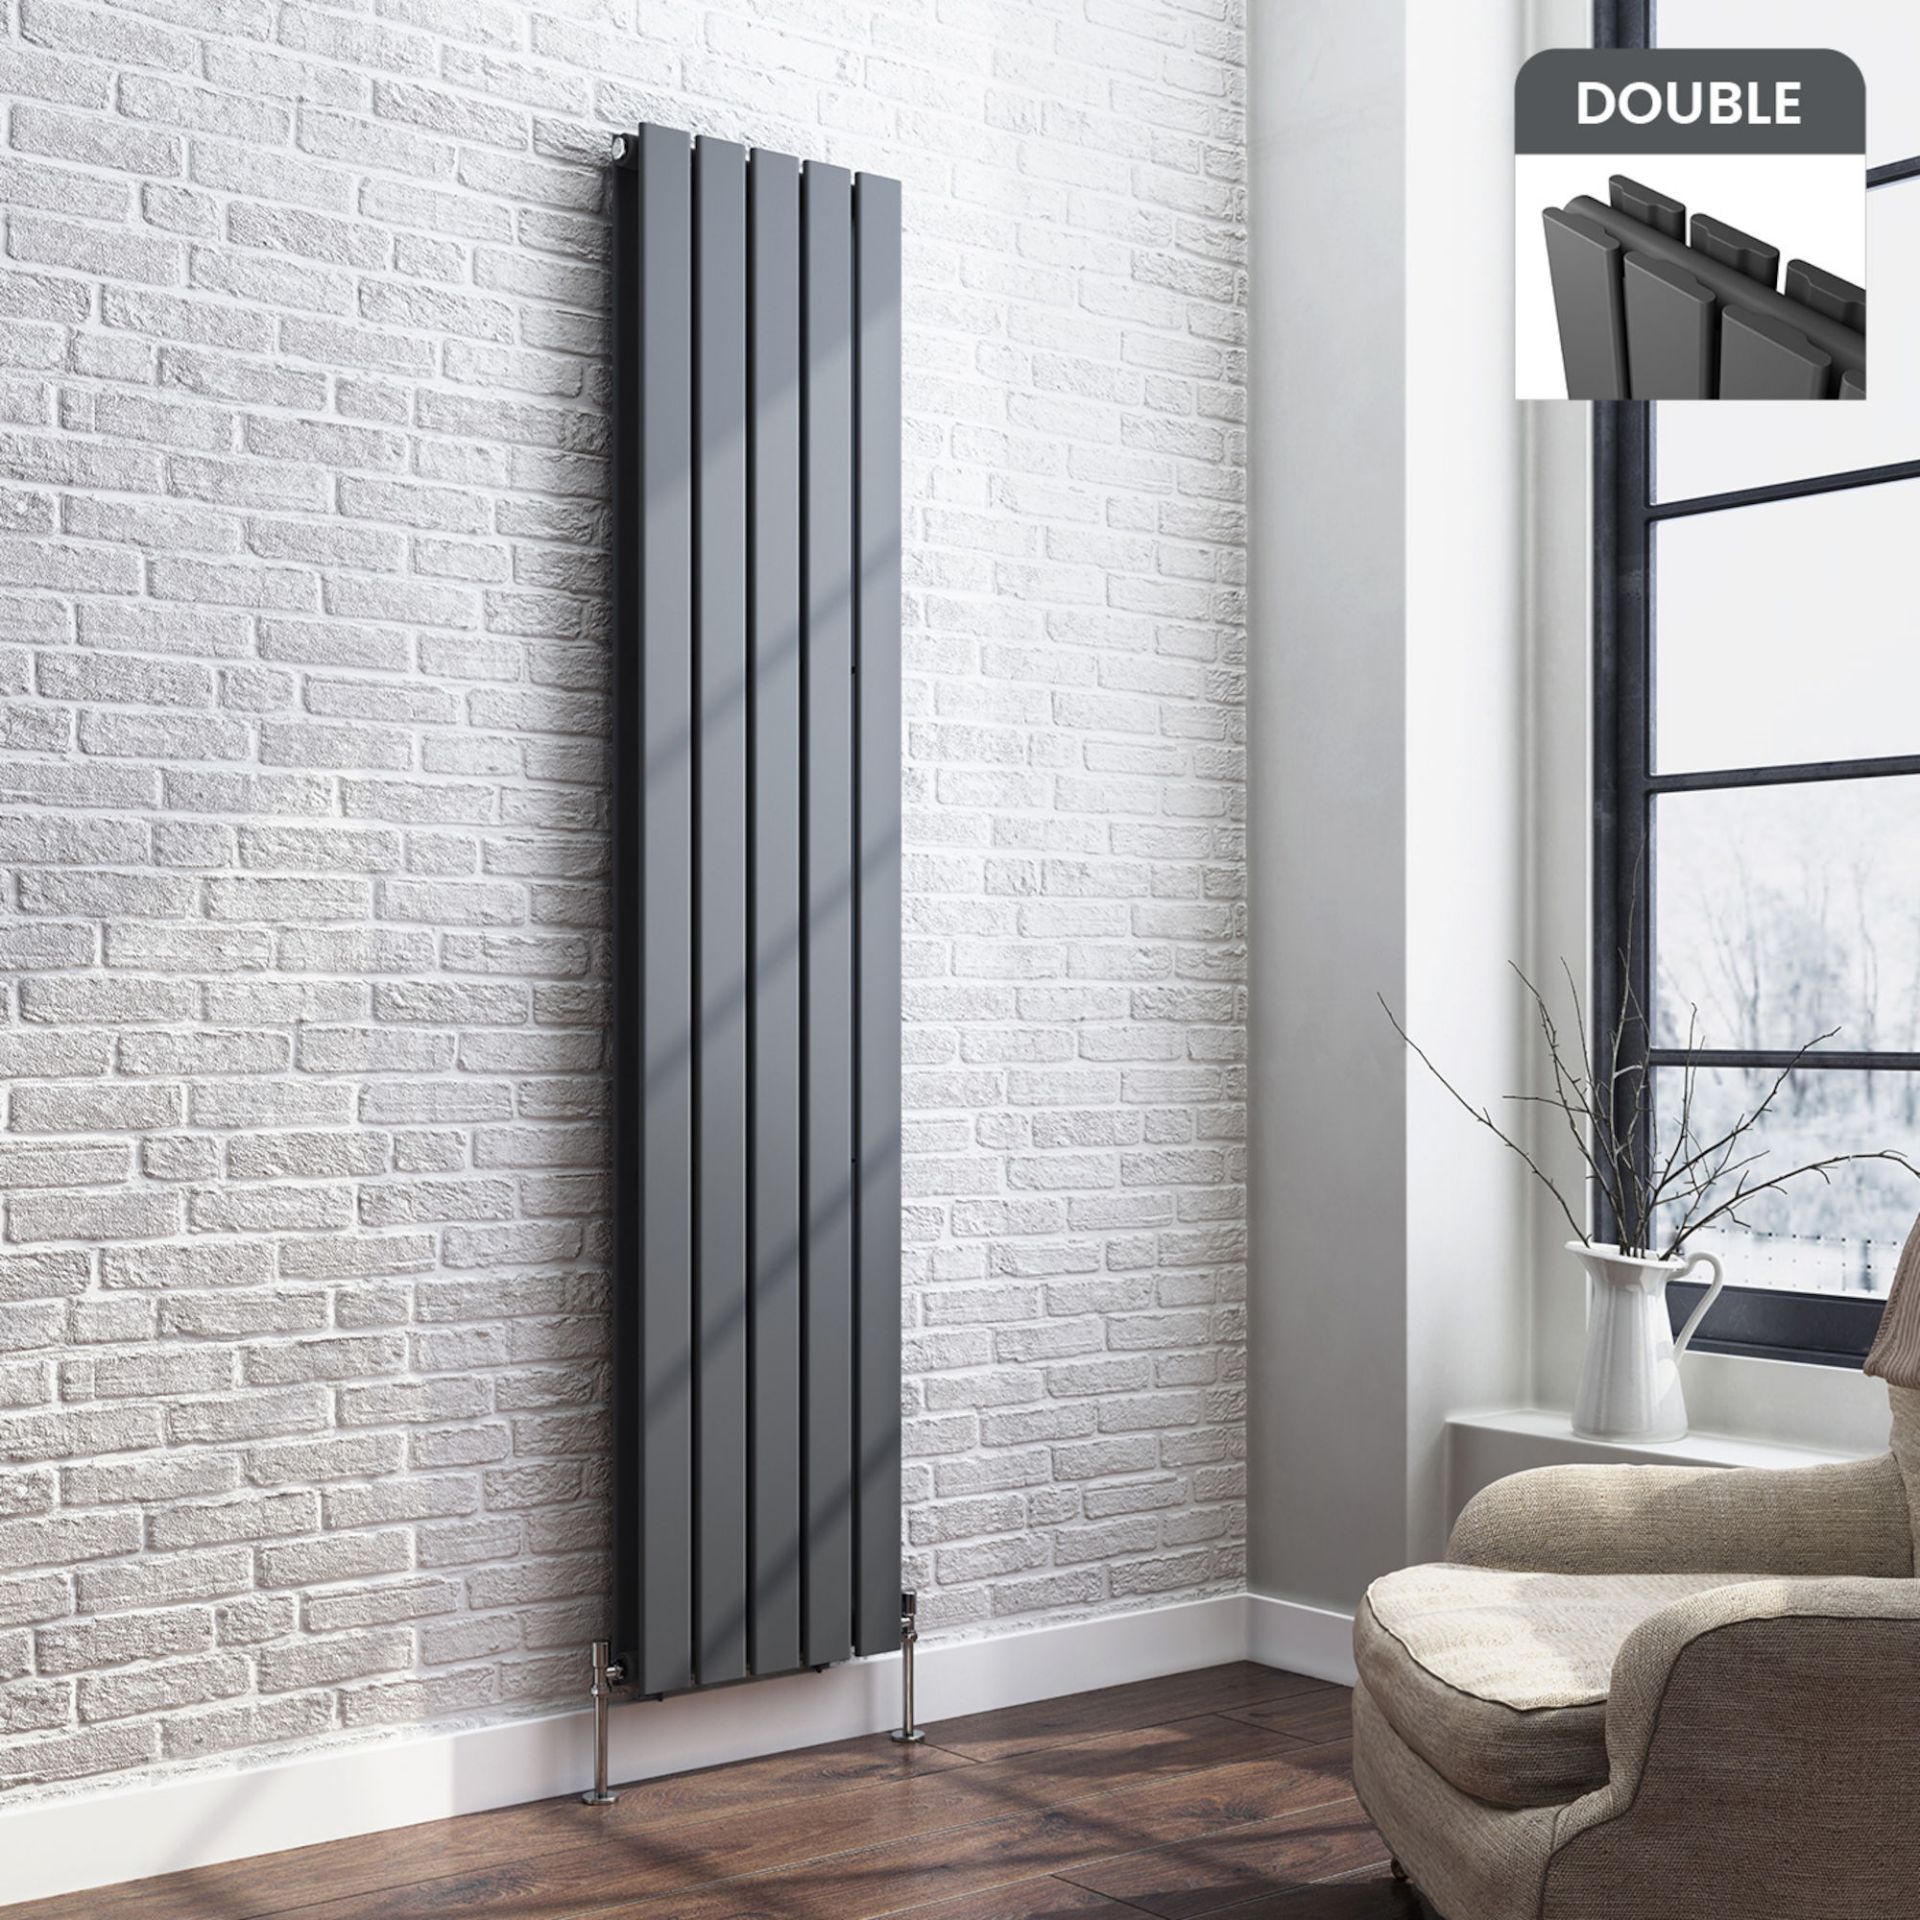 (XM171) 1800x376mm Anthracite Double Flat Panel Vertical Radiator. RRP £399.99. Made with low carbon